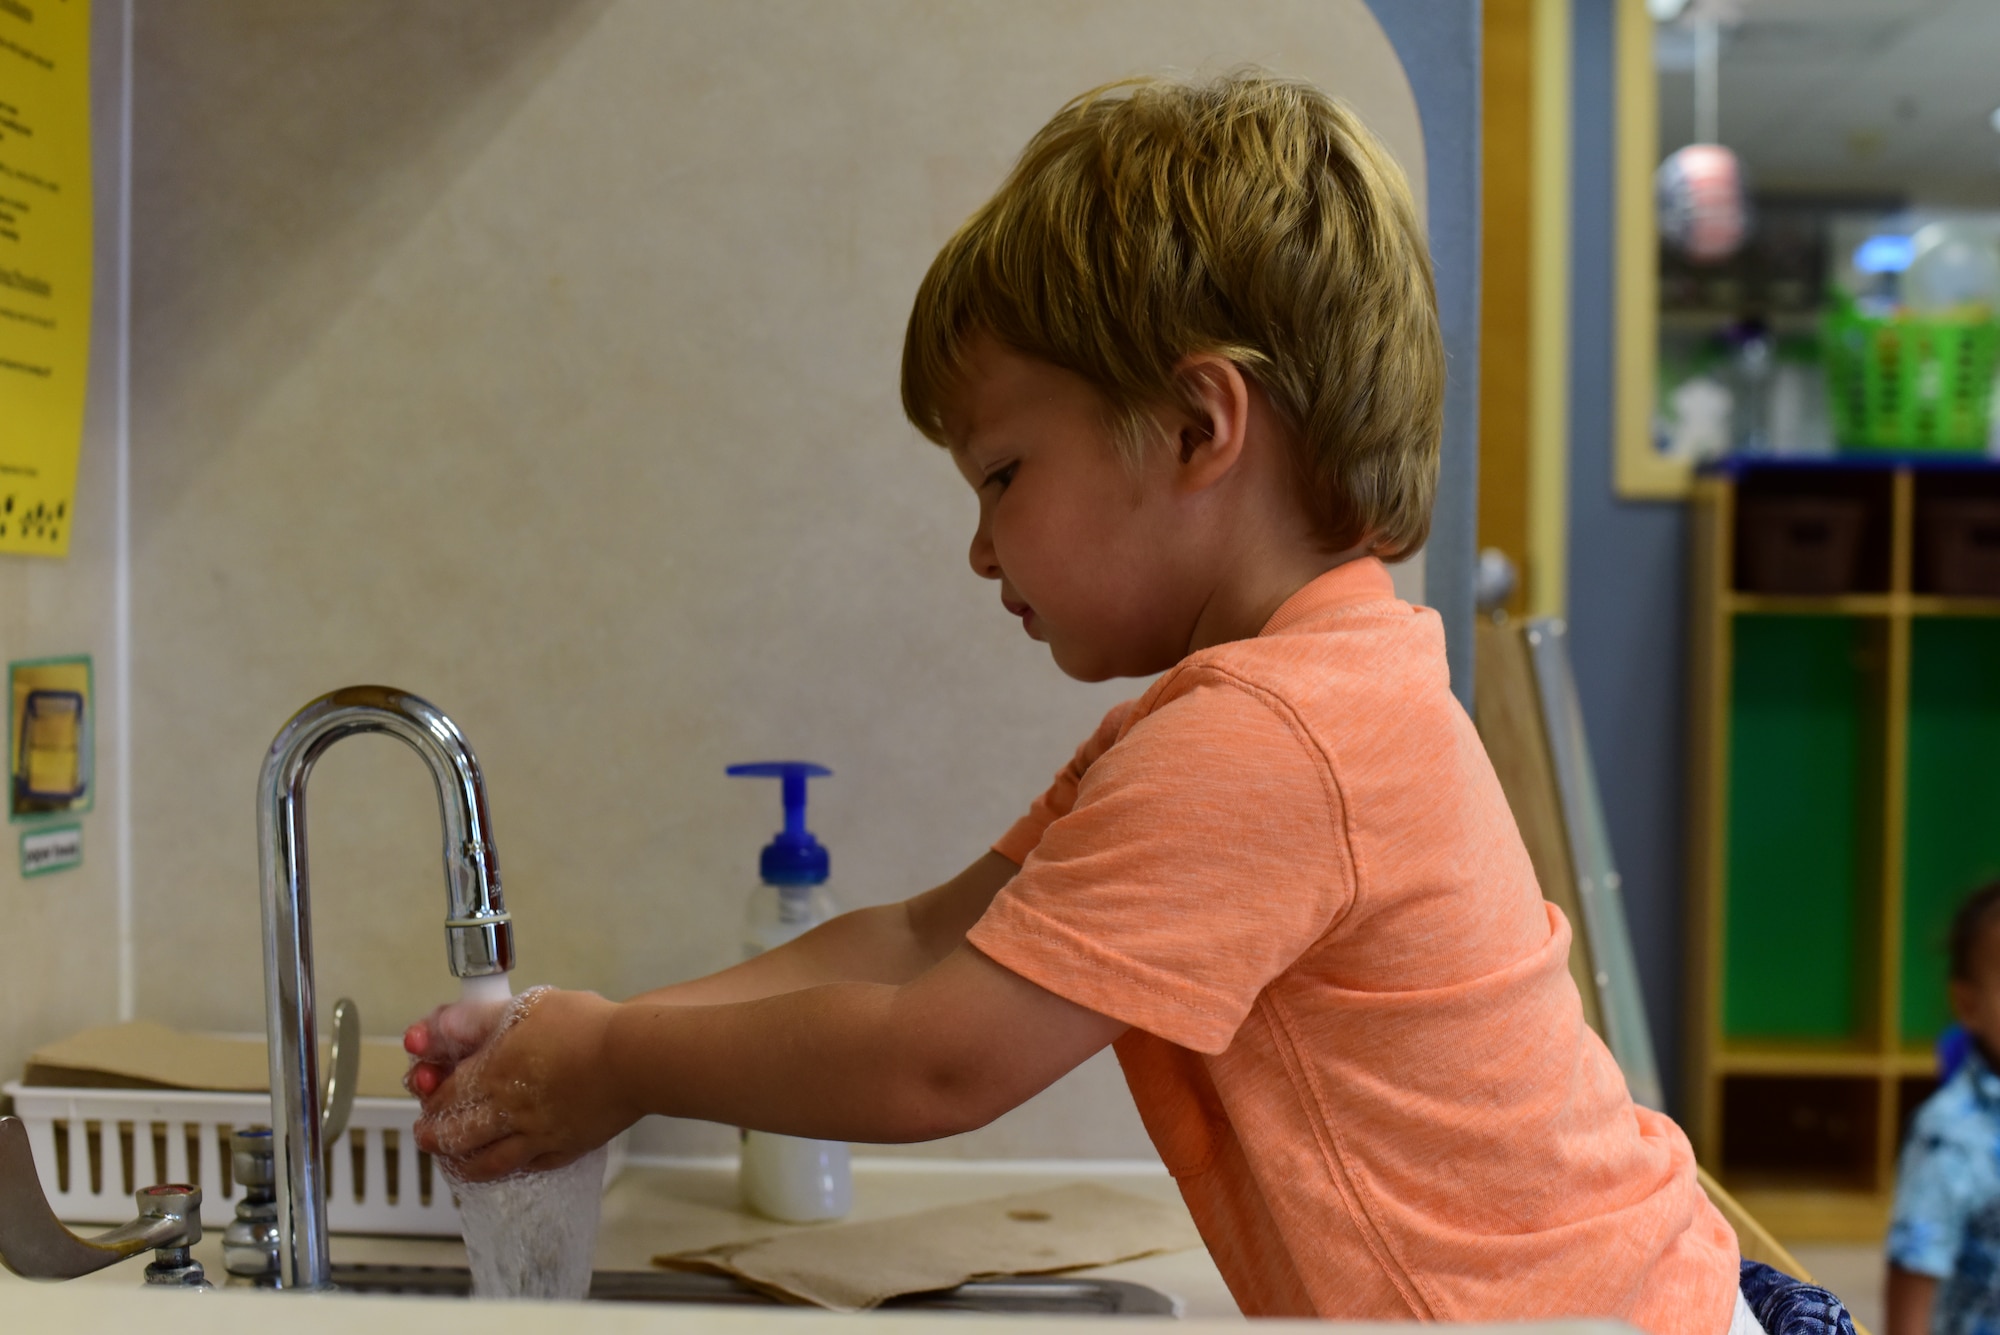 A child from the Child Development Center at Laughlin Air Force Base, Texas, washes his hands between activities, June 5, 2020. Even before the outbreak of COVID-19, the caretakers led the children in washing of hands before meals, between activities and such. (U.S. Air Force Photo by Senior Airman Anne McCready)